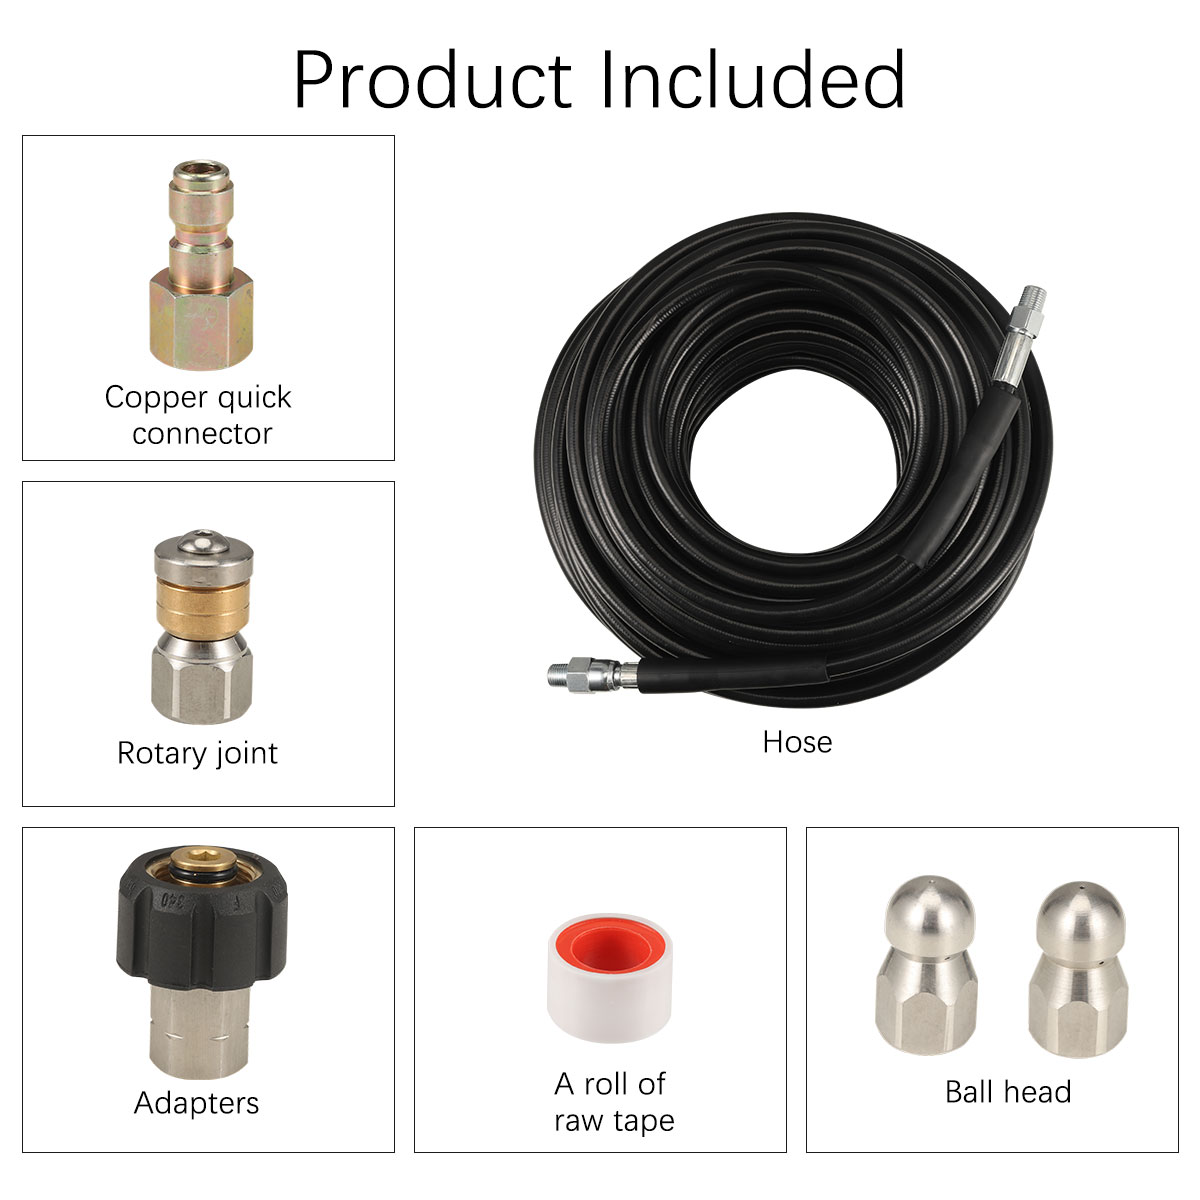 button type sewer nozzle and waterproof tape rotation High pressure washer sewer washer kit-100 FT 5800 PSI drain cleaning hose daily tool for pressure angle 1/4 inch NPT including 100 foot hose 